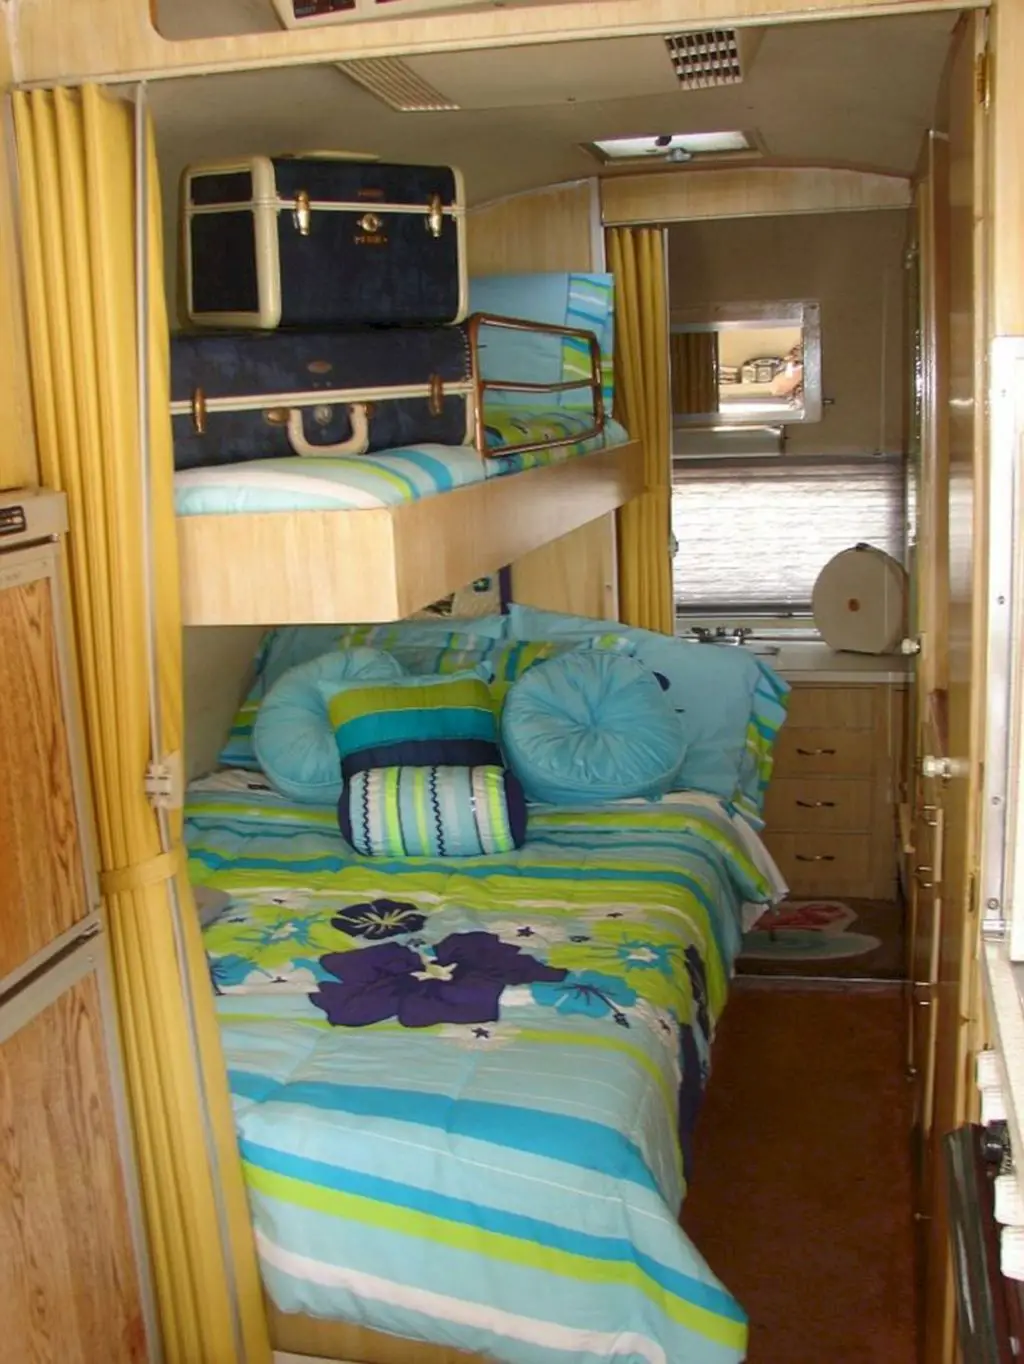 Decorate Trailer With Bunk Beds, Trailer With Bunk Beds